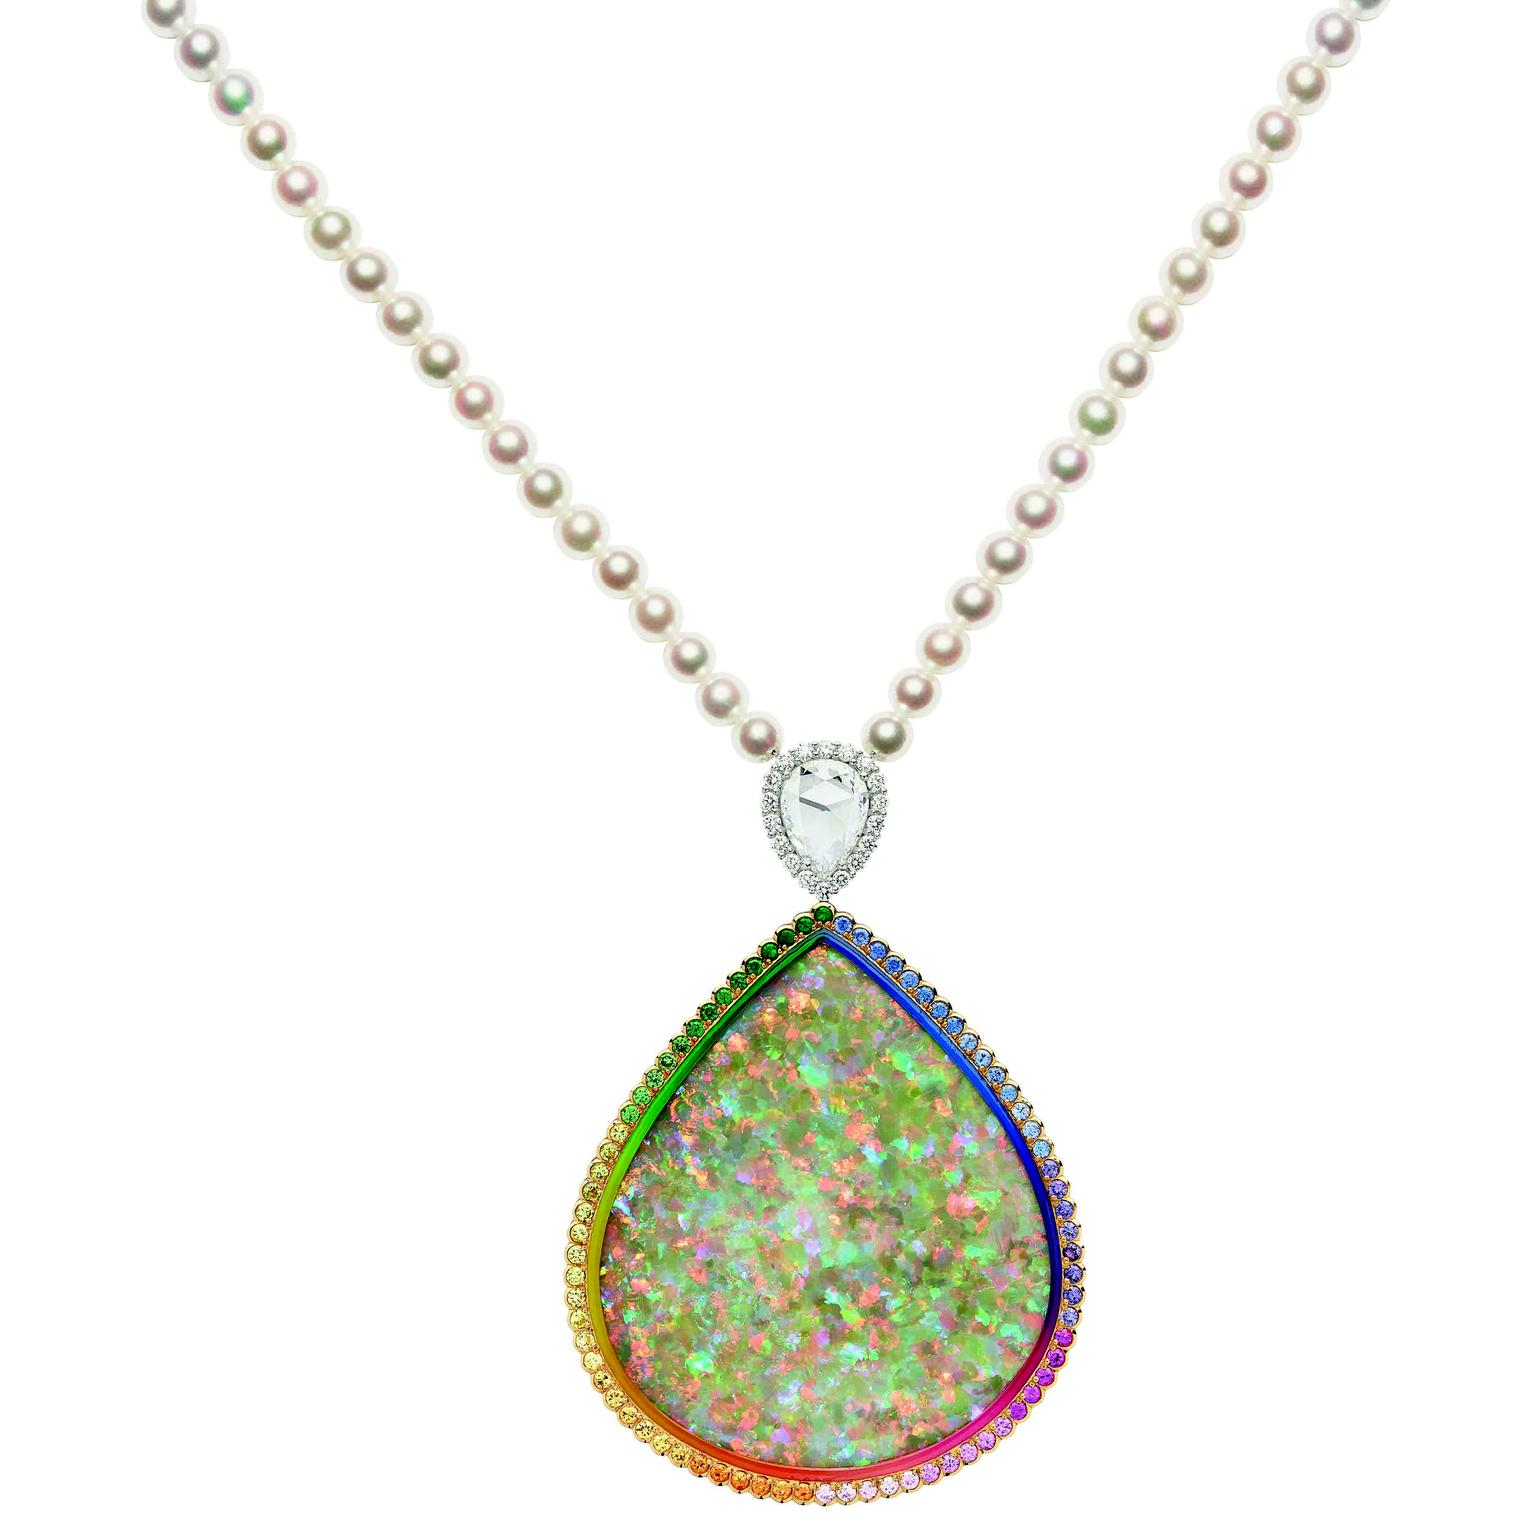 Dior et Moi high jewellery necklace